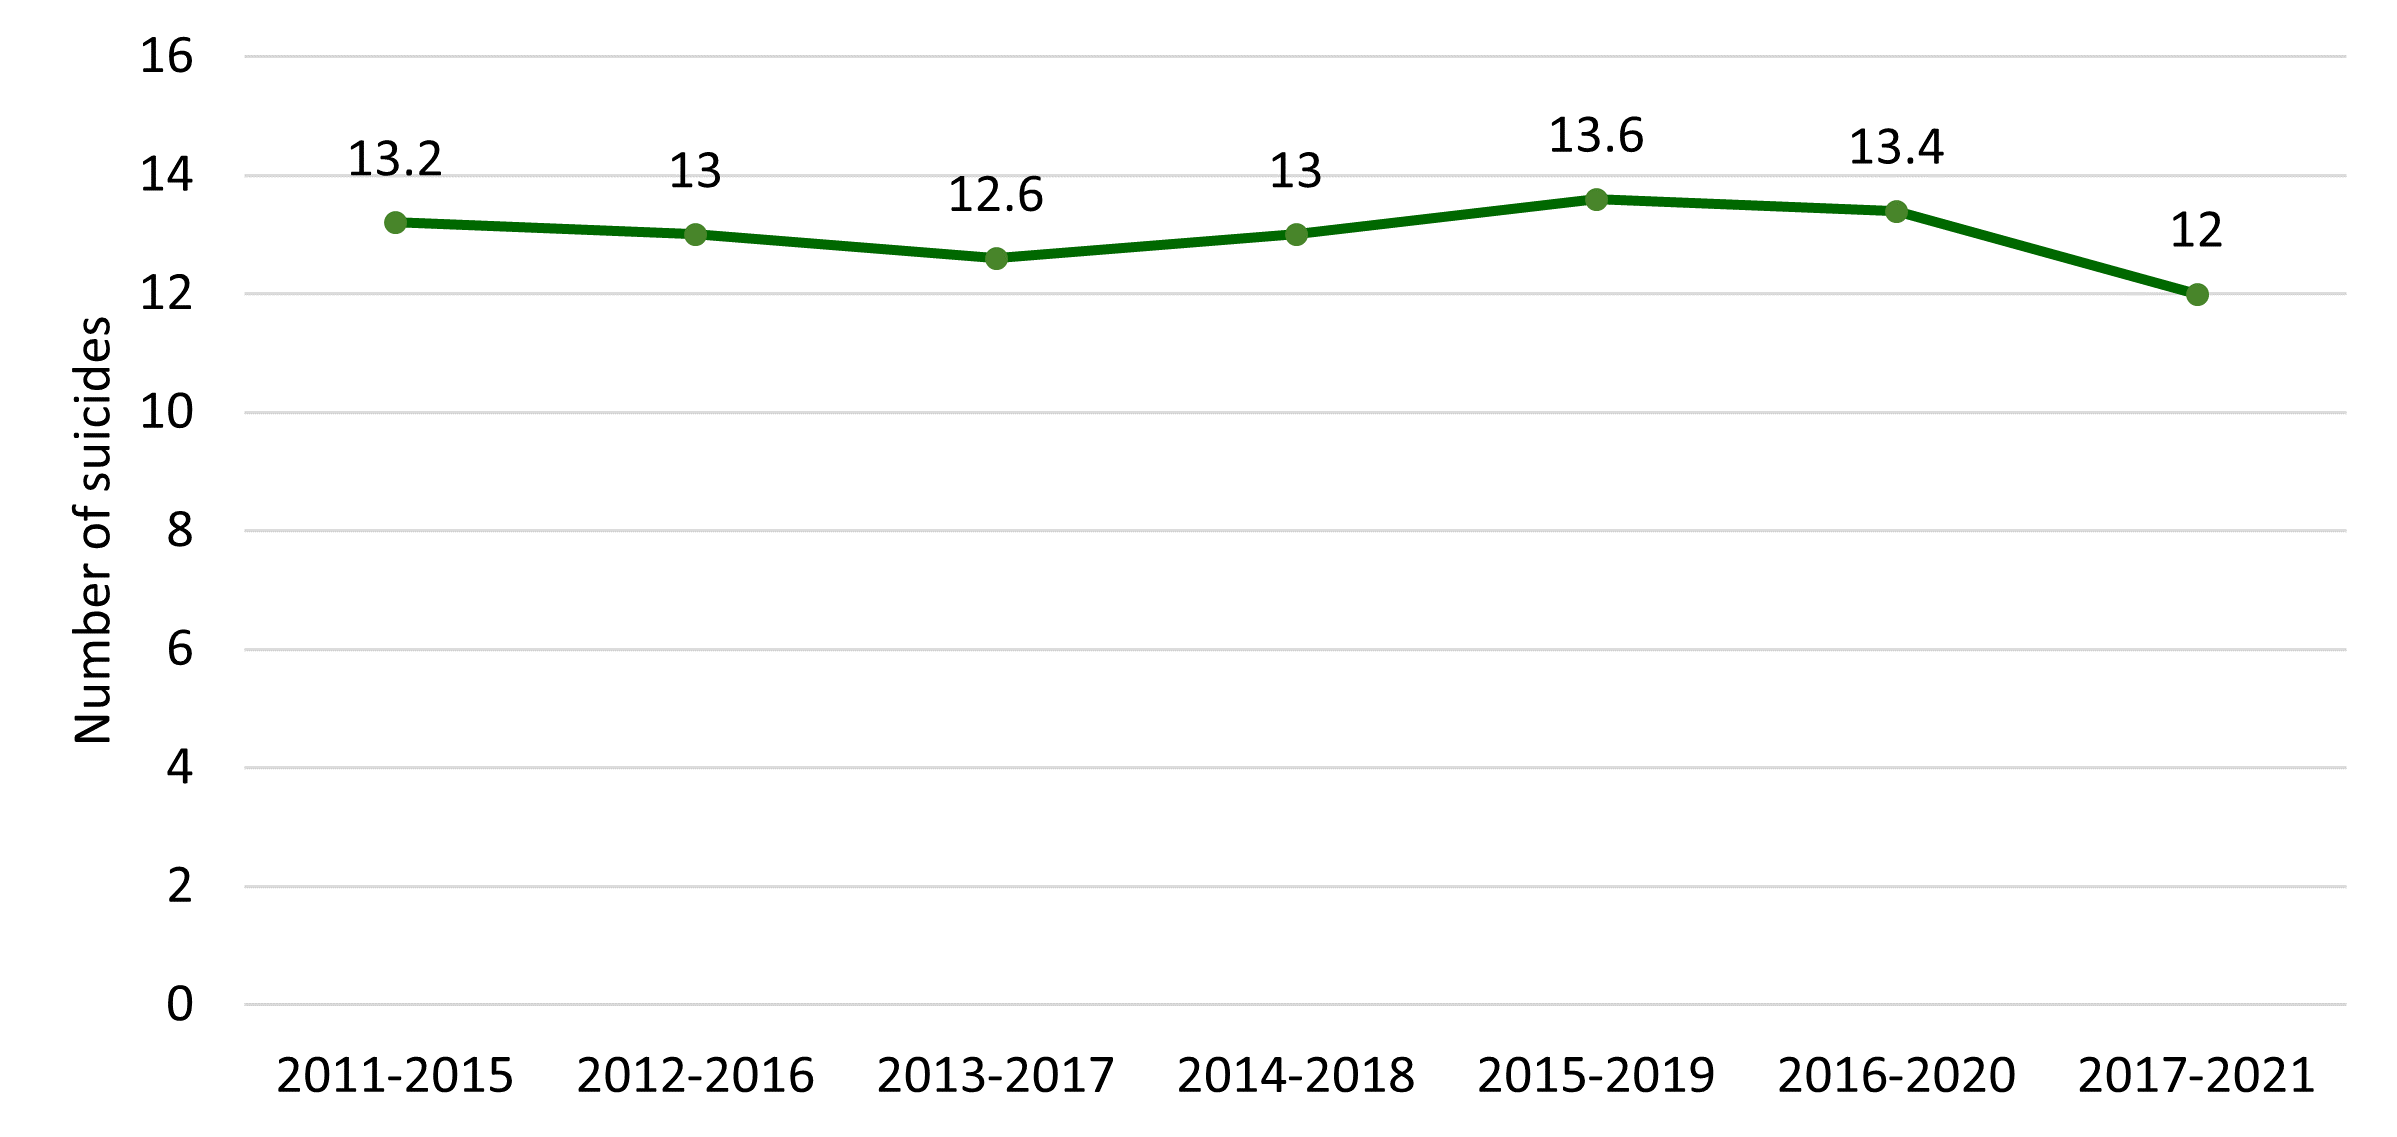 Line graph showing number of suicides of Midlothian residents from 13.2 in 2011 to 2015, to 12 in 2017-2021. The highest being 13.6 in 2015-2019, and lowest of 12 in 2017-2021.